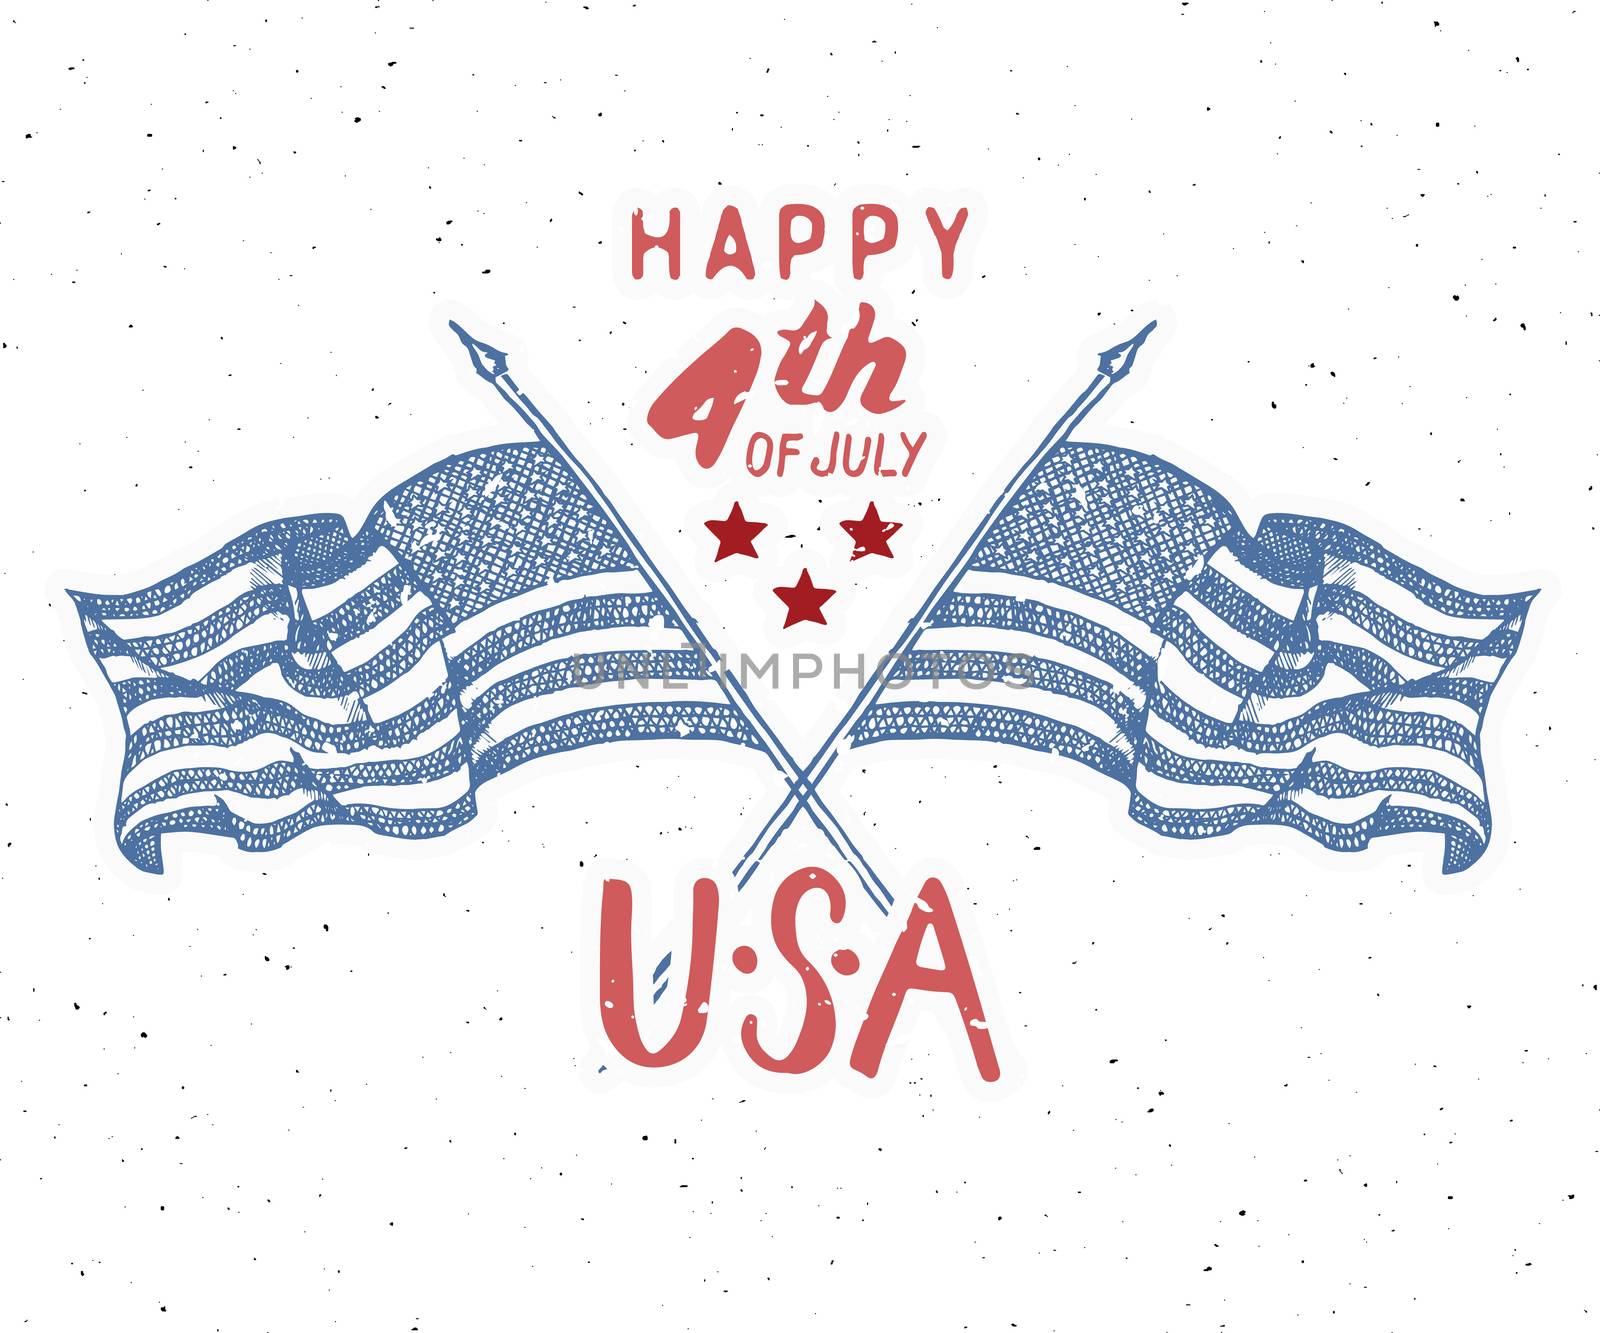 Happy Independence Day, fourth of july, Vintage greeting card wirh USA flags, United States of America celebration. Hand lettering, american holiday grunge textured retro design vector illustration. by Lemon_workshop